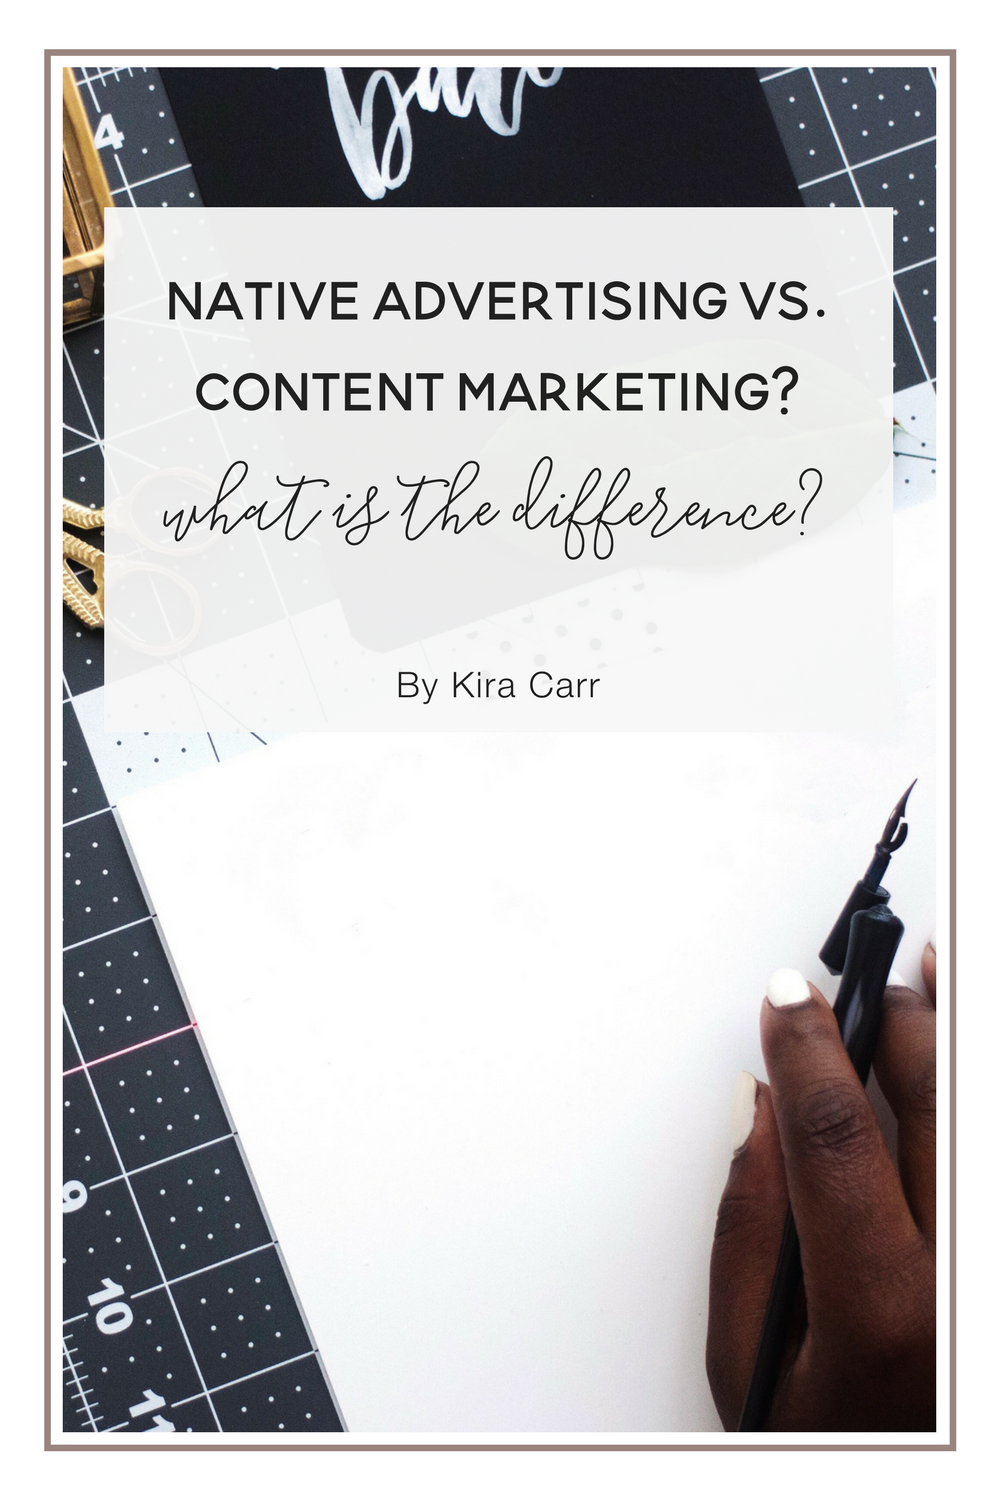 What's the Difference between Native Advertising and Content Marketing?